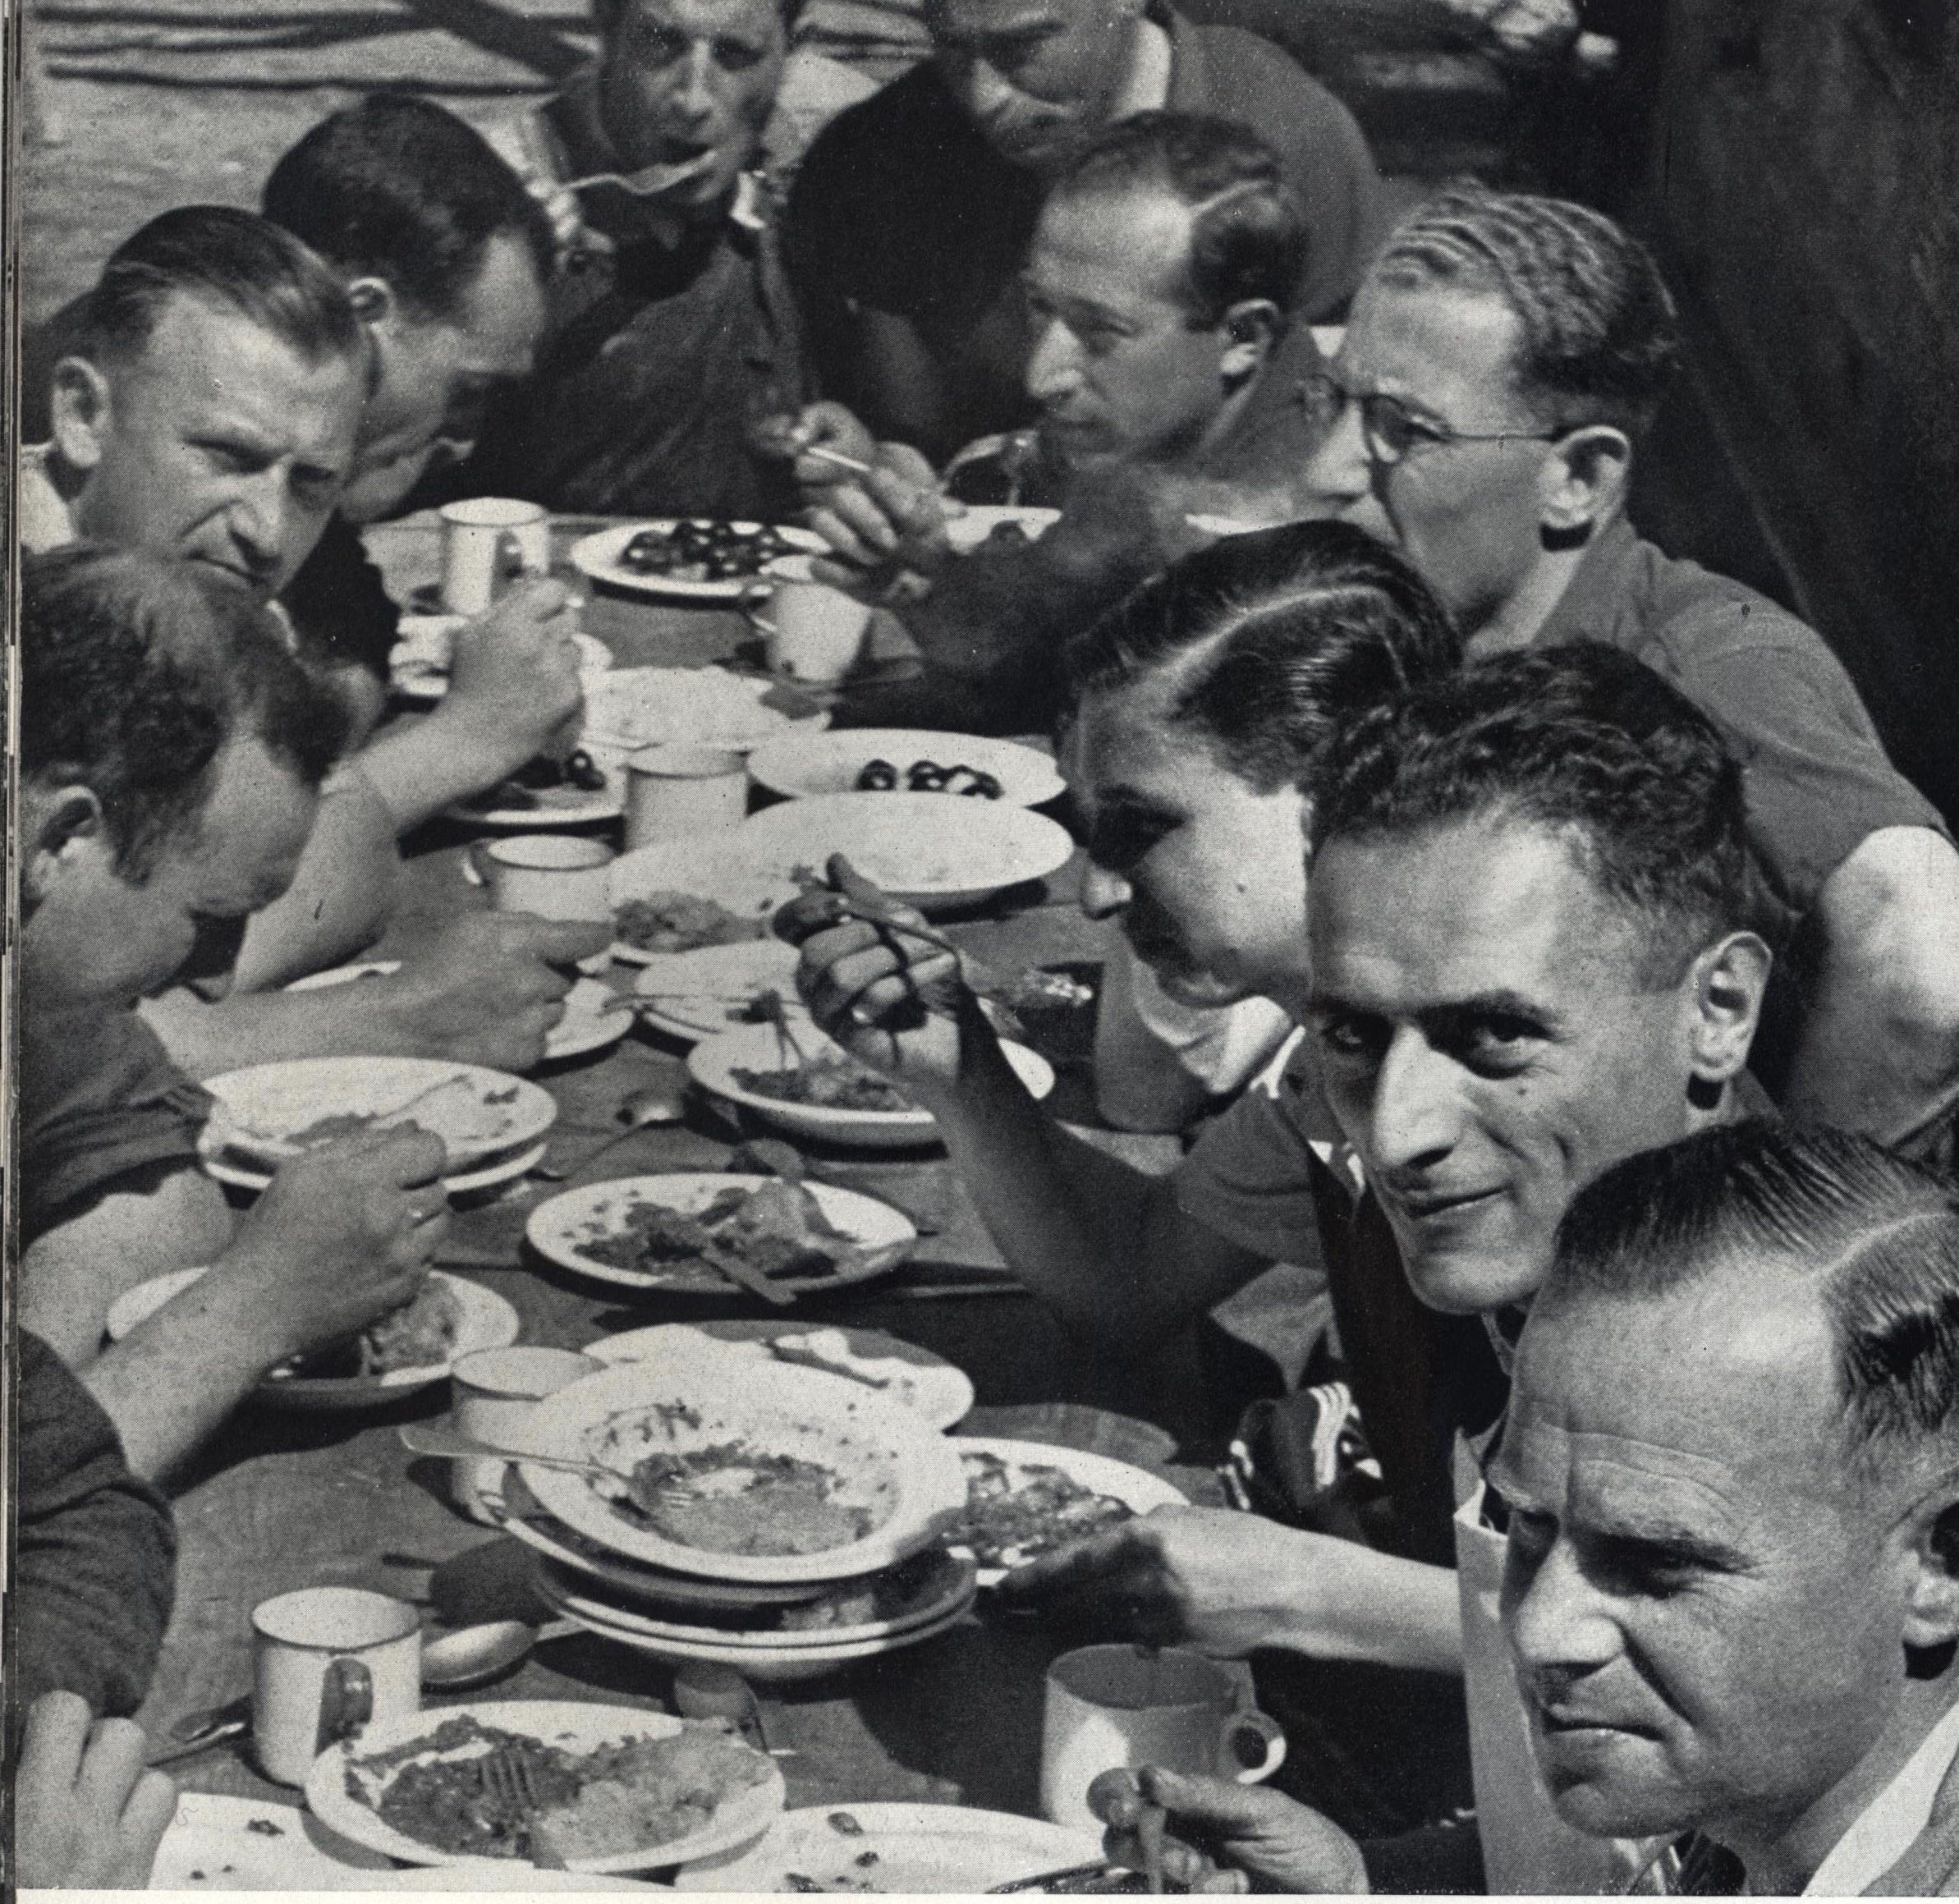 Richborough transit camp, Some Victims of the Nazi Terror, 1939 - communal mealtimes